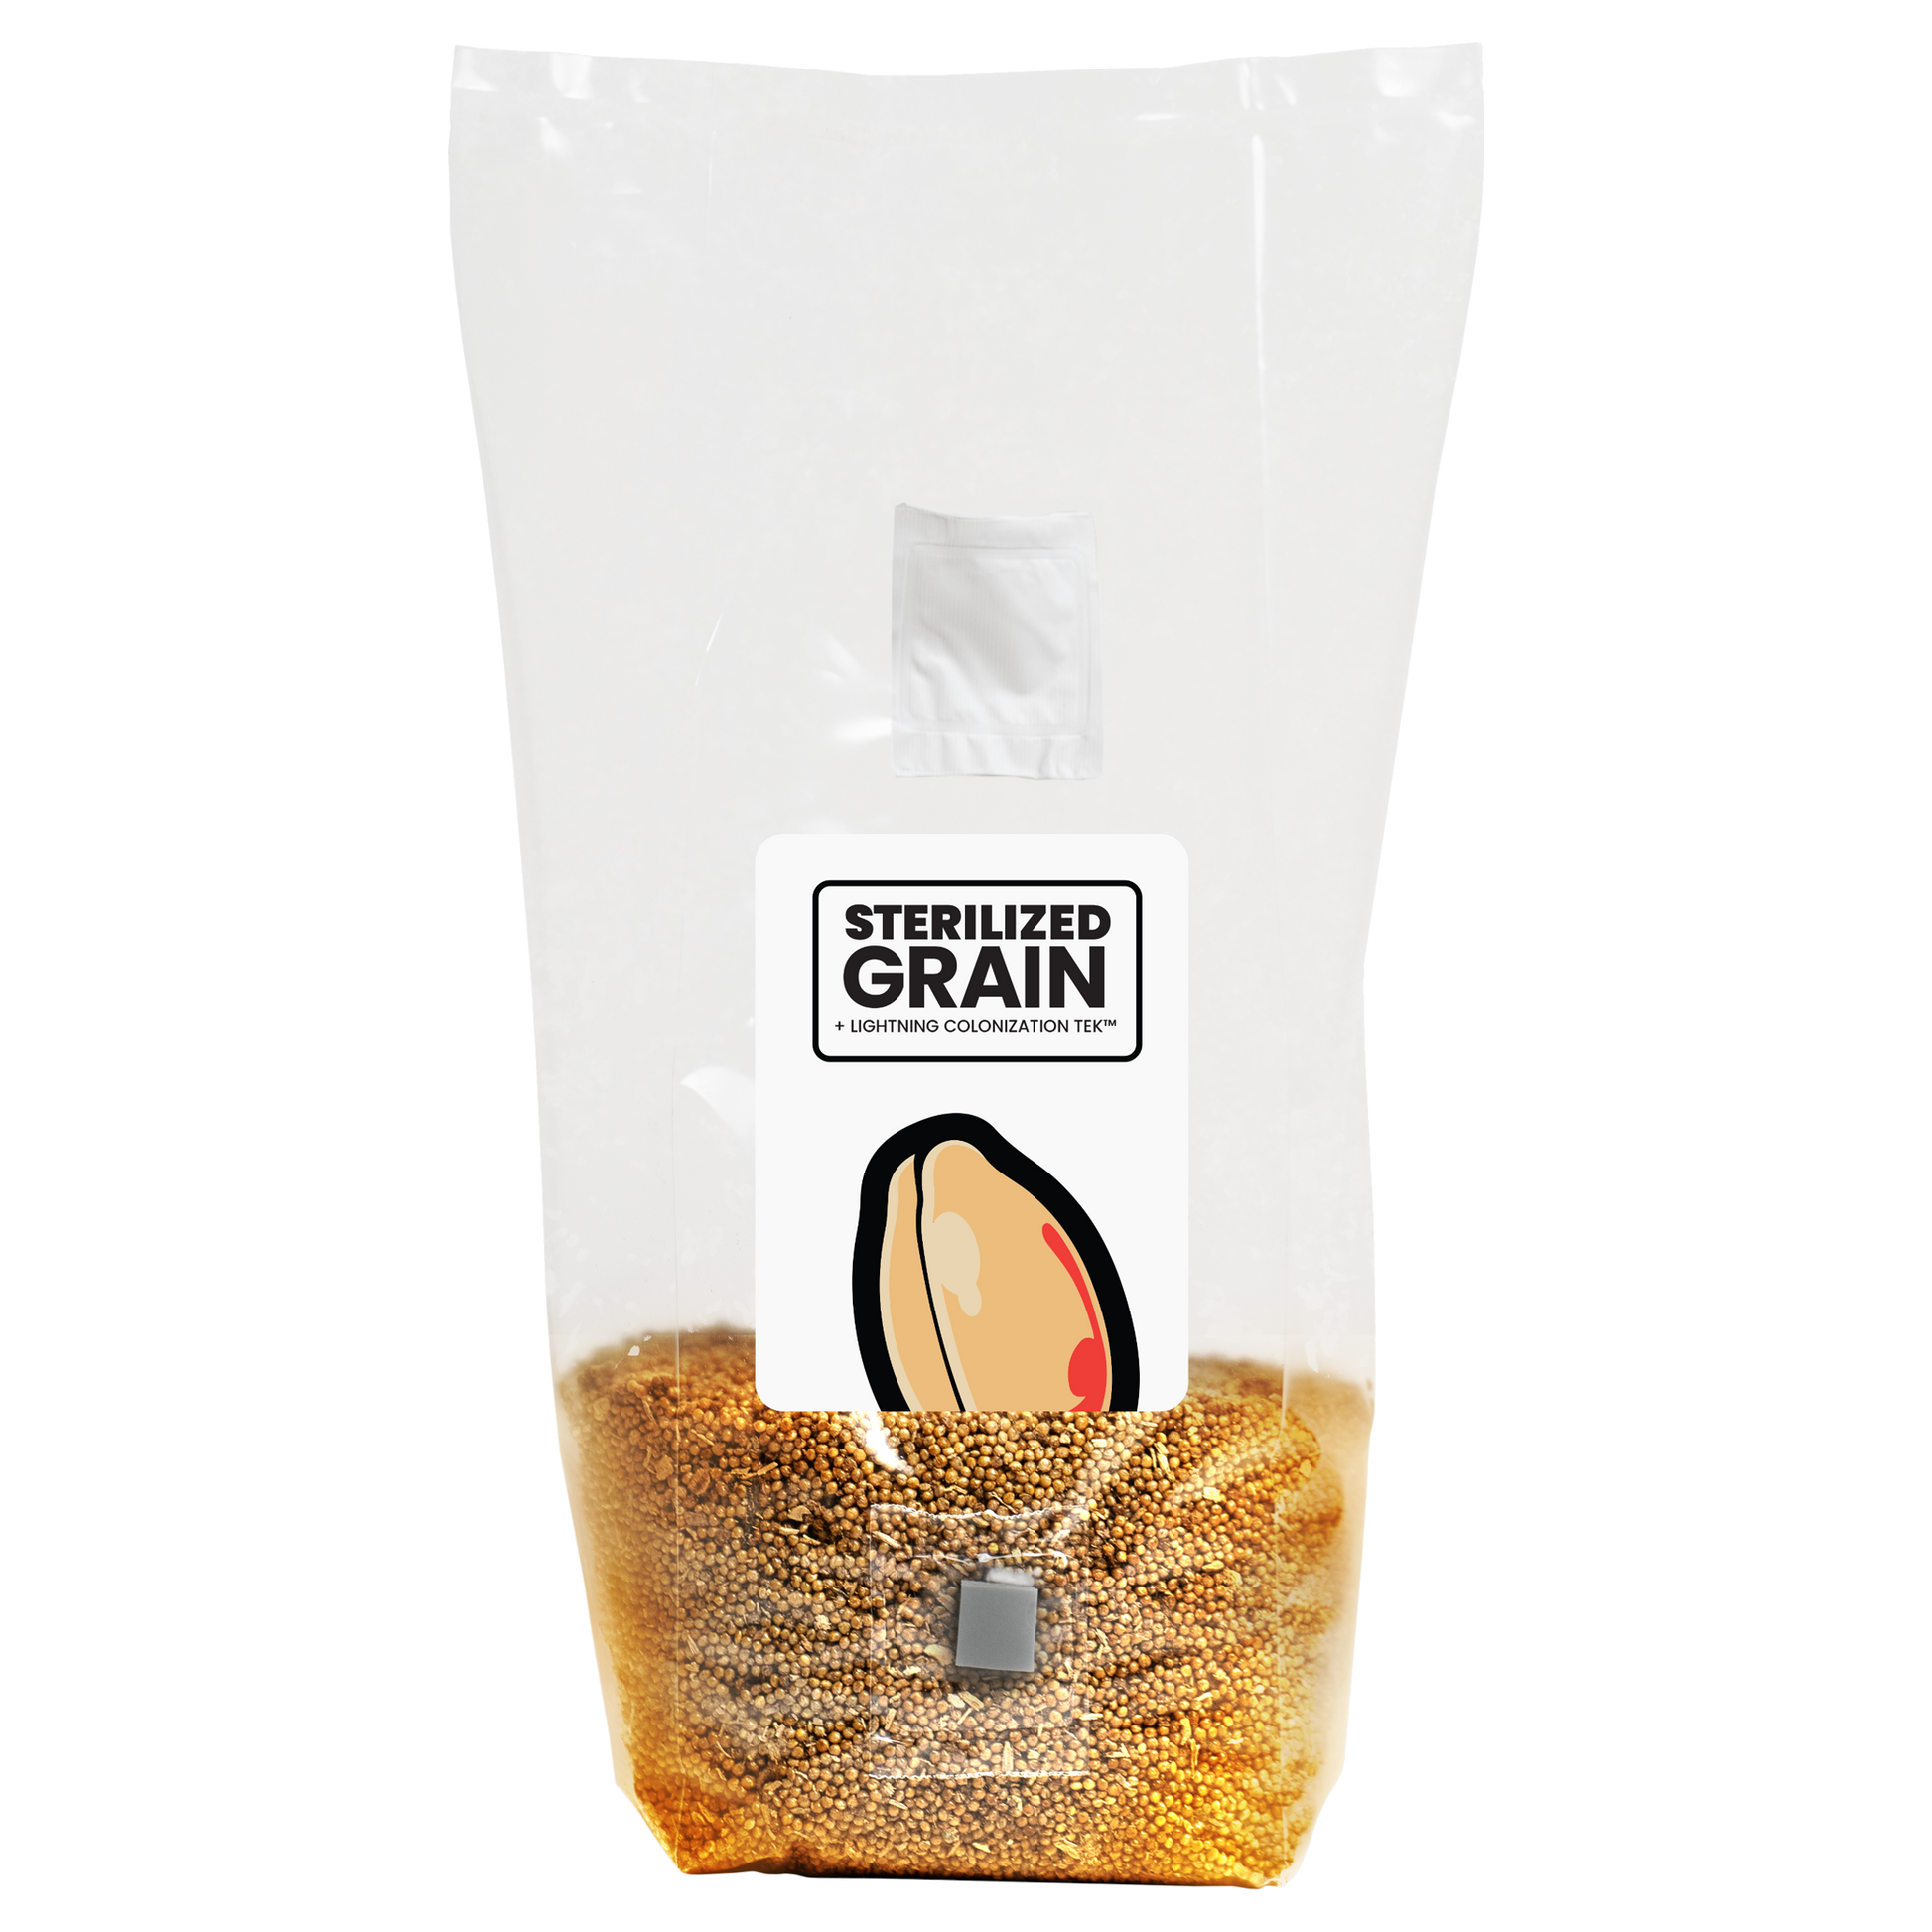 A sealed plastic grain spawn bag labeled 'Sterilized Grain' with a clear viewing window showing millet grains, standing upright against a white background.